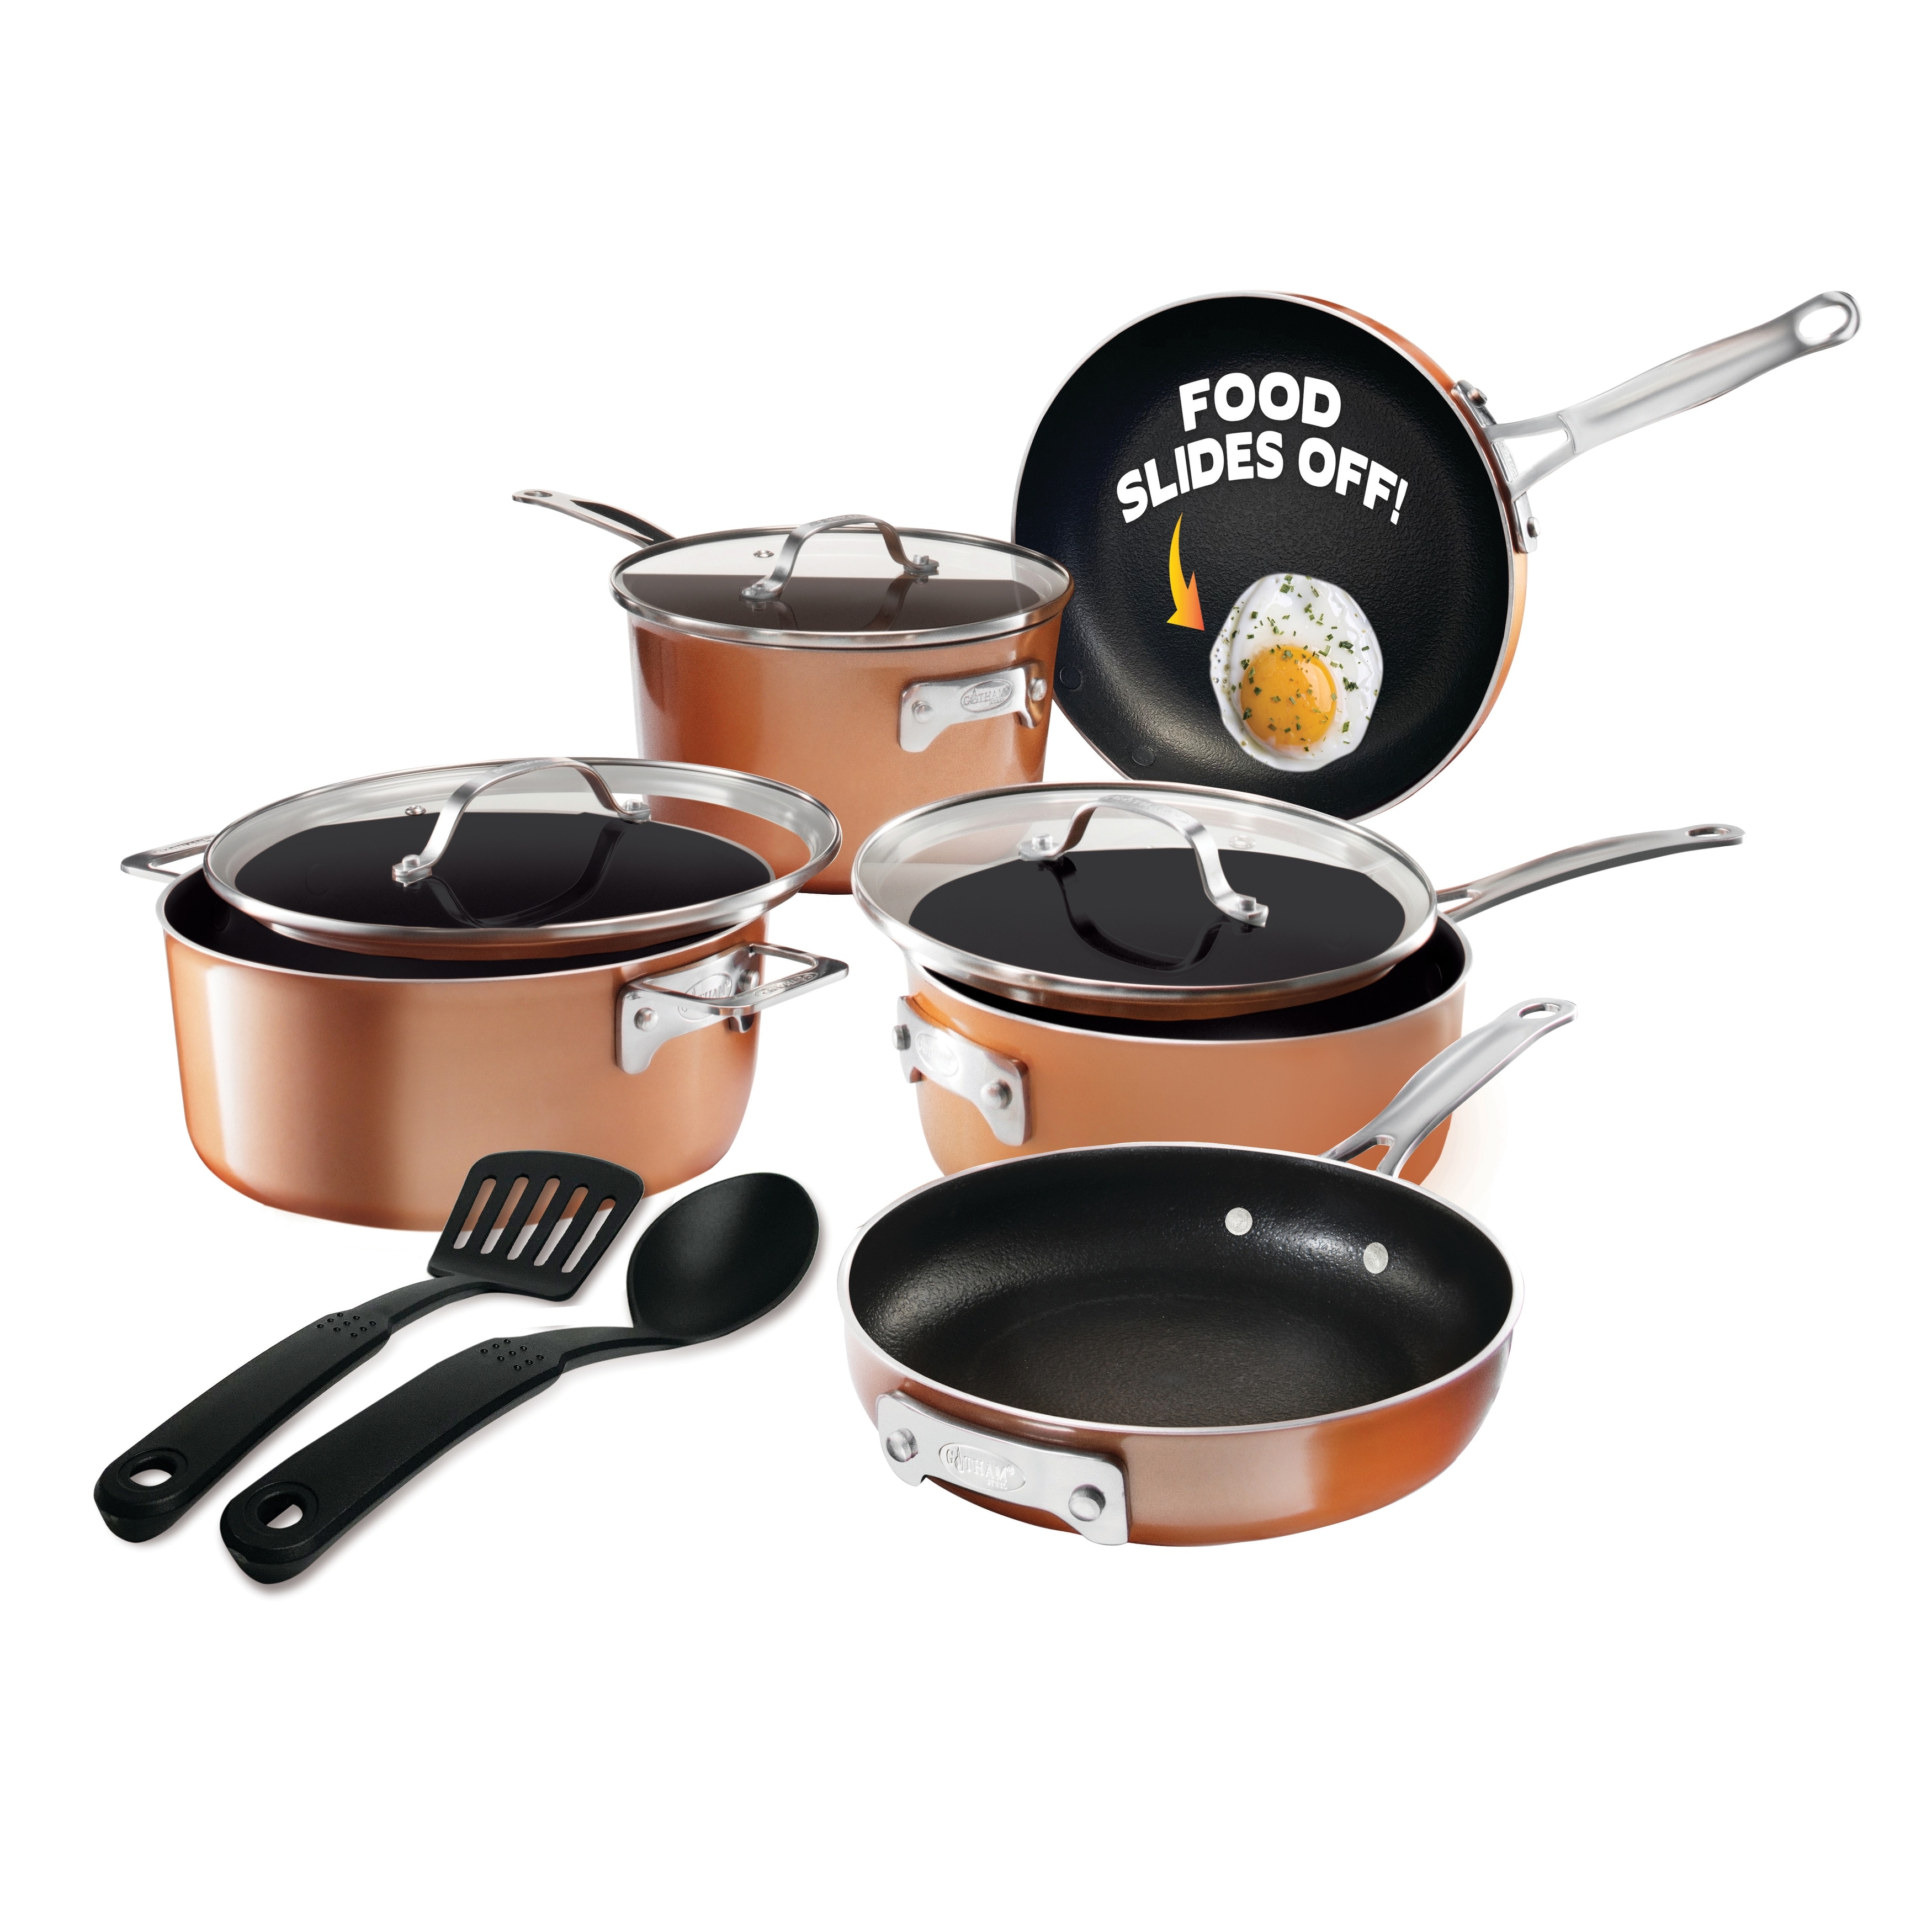 https://ak1.ostkcdn.com/images/products/is/images/direct/f9fdde6da7ffebf543a7cb6ae01bfa6cec224a1f/Gotham-Steel-Stackmaster-Stackable-Non-Stick-10pc-Cookware-set.jpg